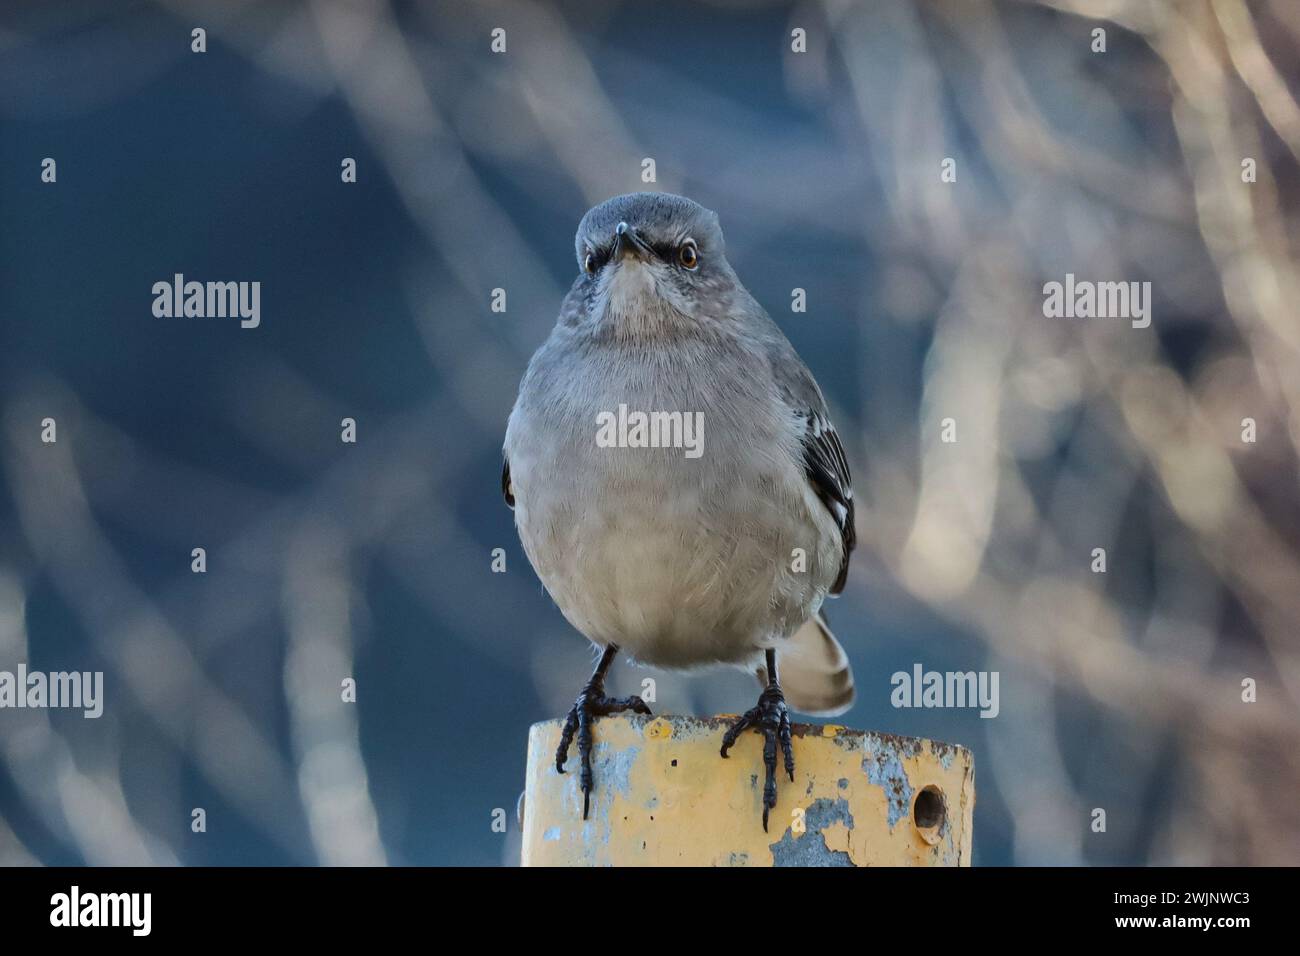 An image of a Northern Mockingbird perched on a post at Tommy Thompson Park in Toronto, Ontario. Stock Photo